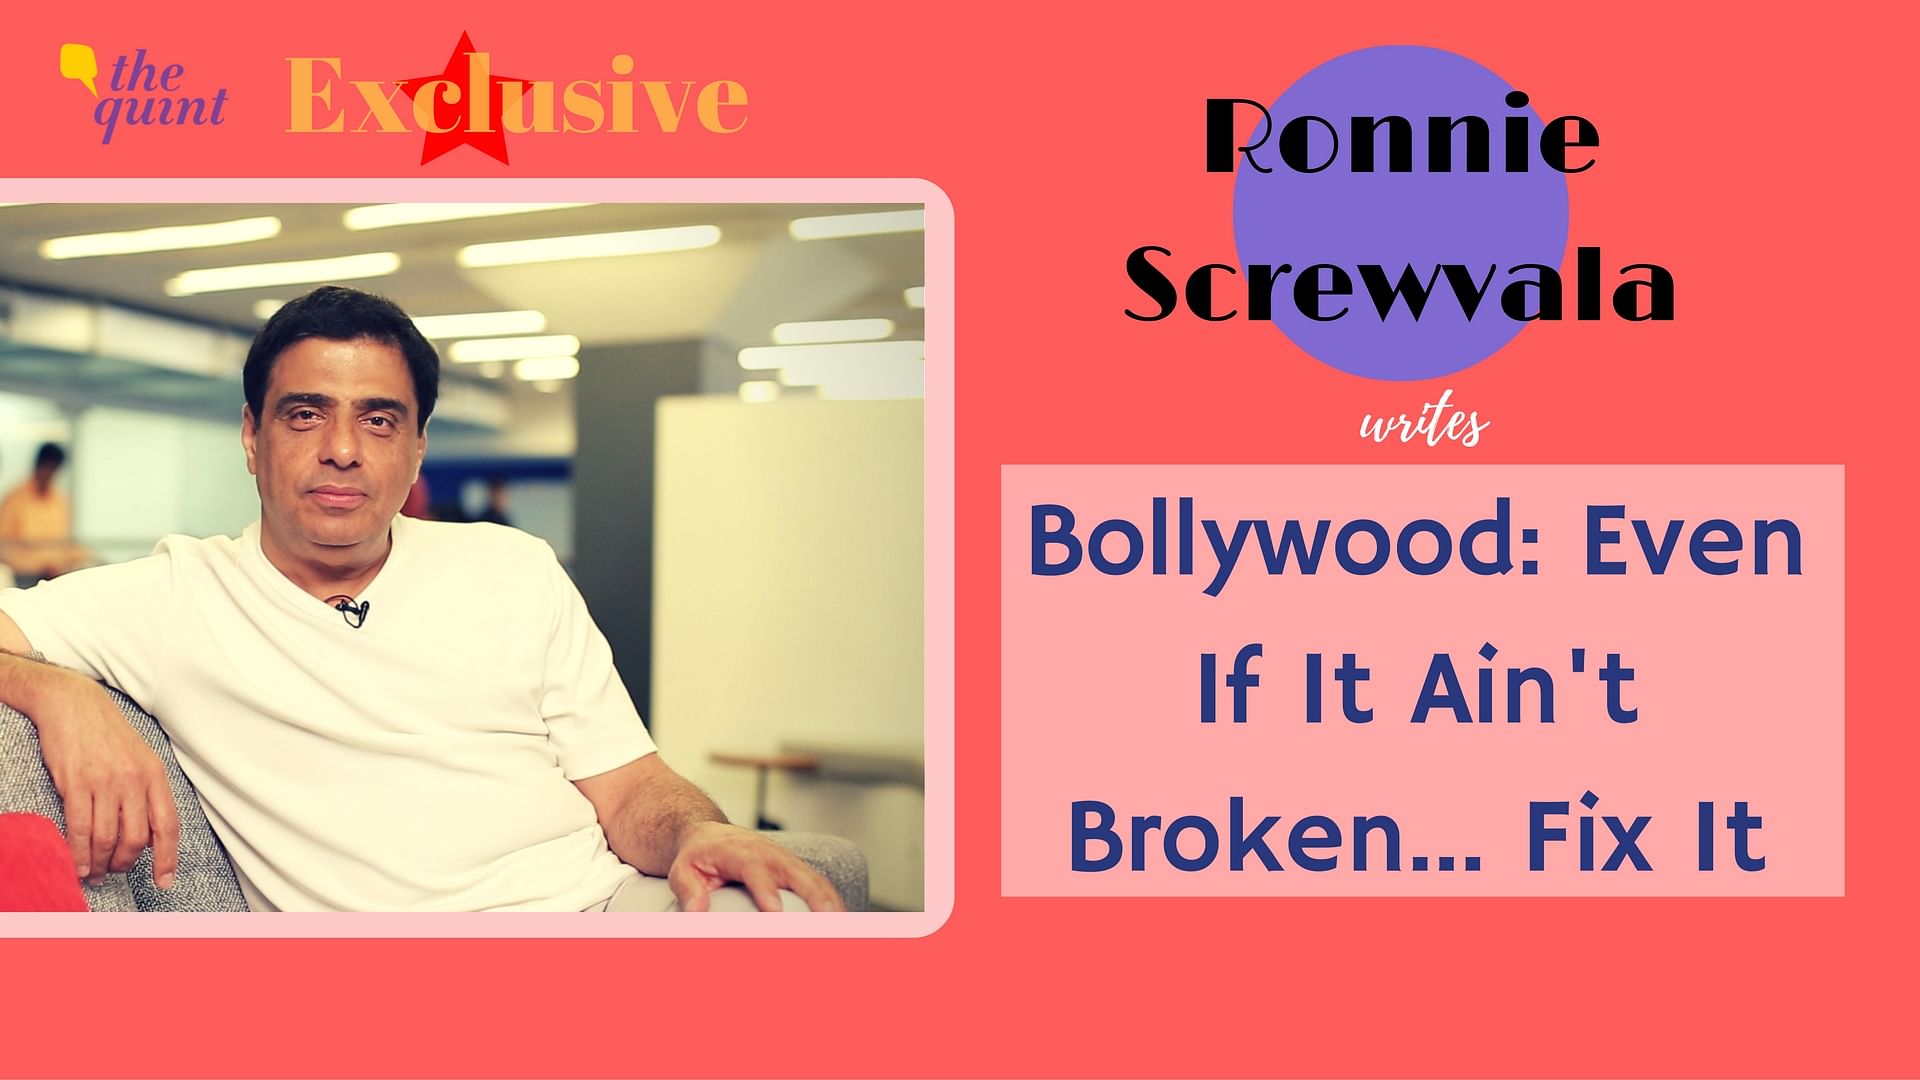 Ronnie Screwvala puts down his thoughts on business in Bollywood in a blog.